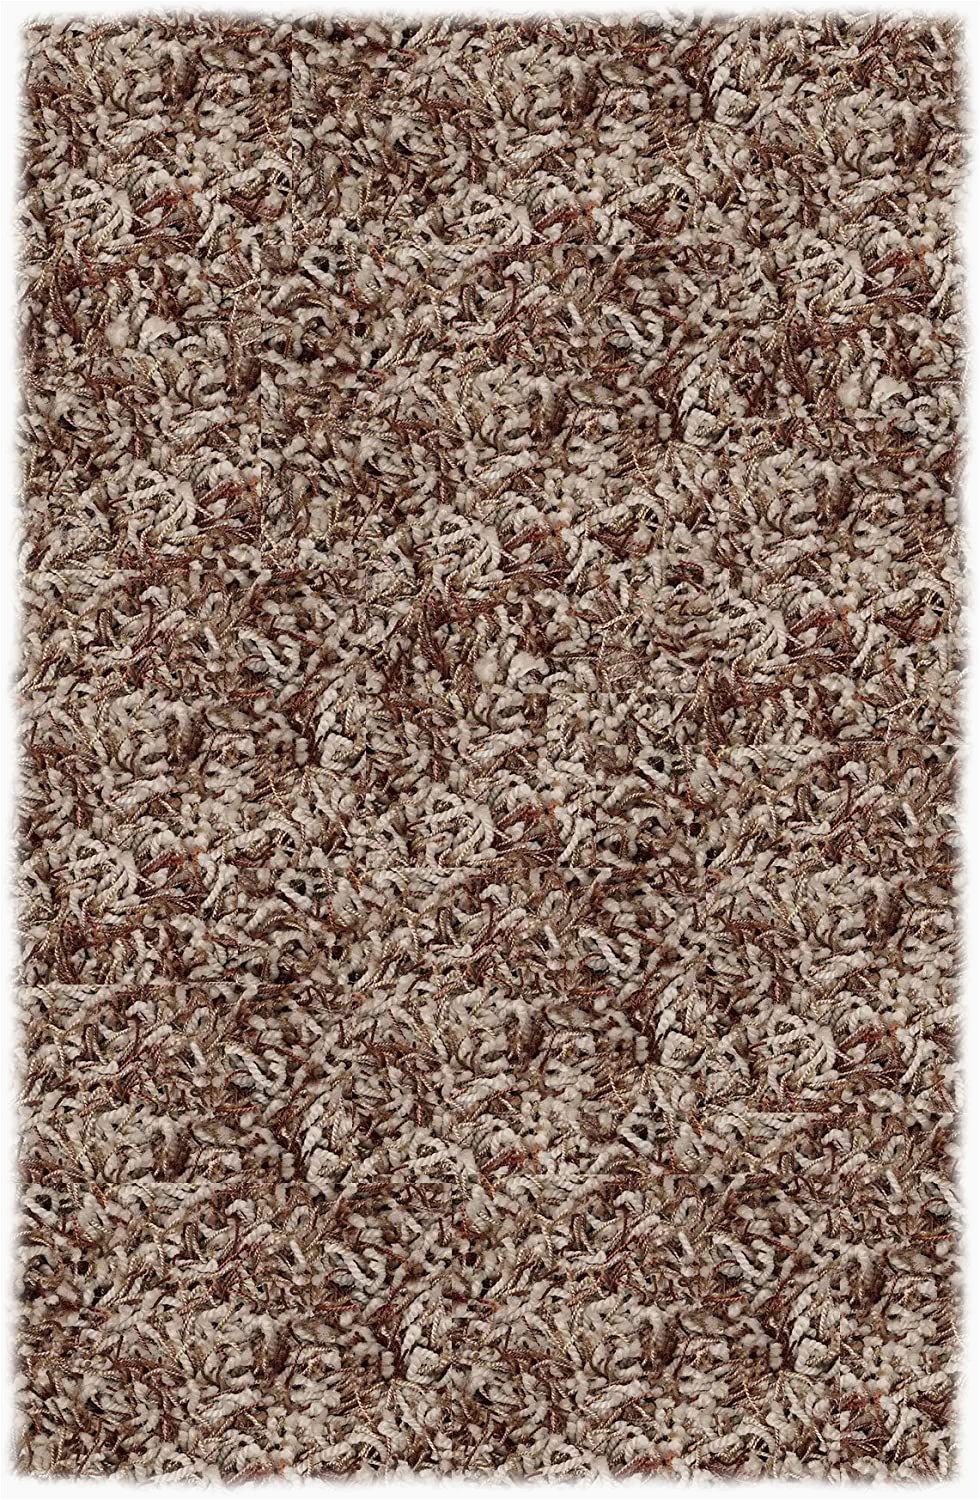 12 Ft Round area Rugs Amazon Shaw Super Shag area Rug Bling Collection Tweed